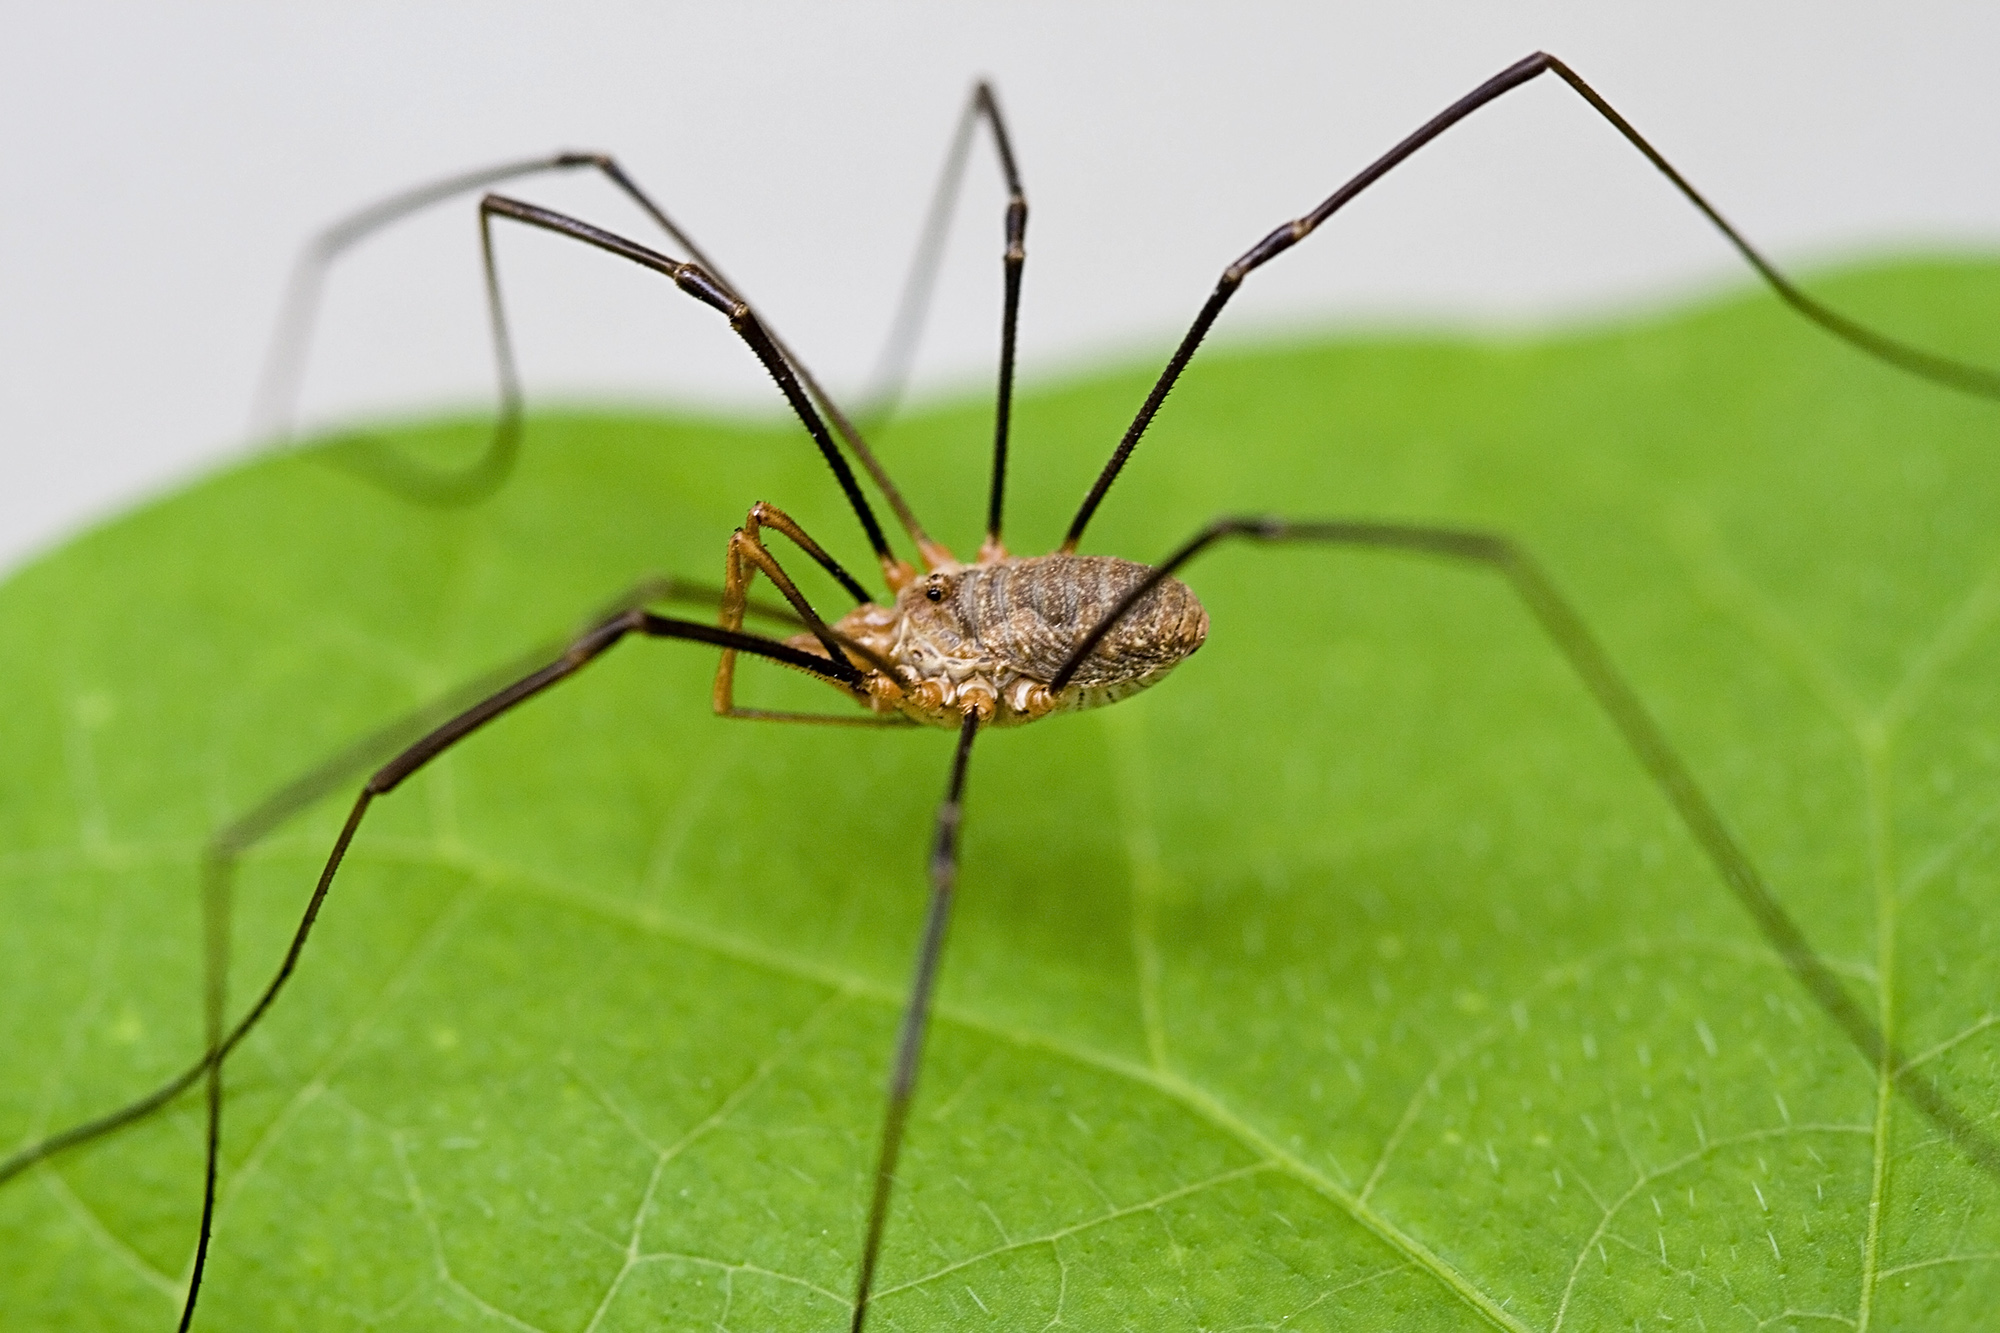 Facts about the Harvestman (Daddy Longlegs)